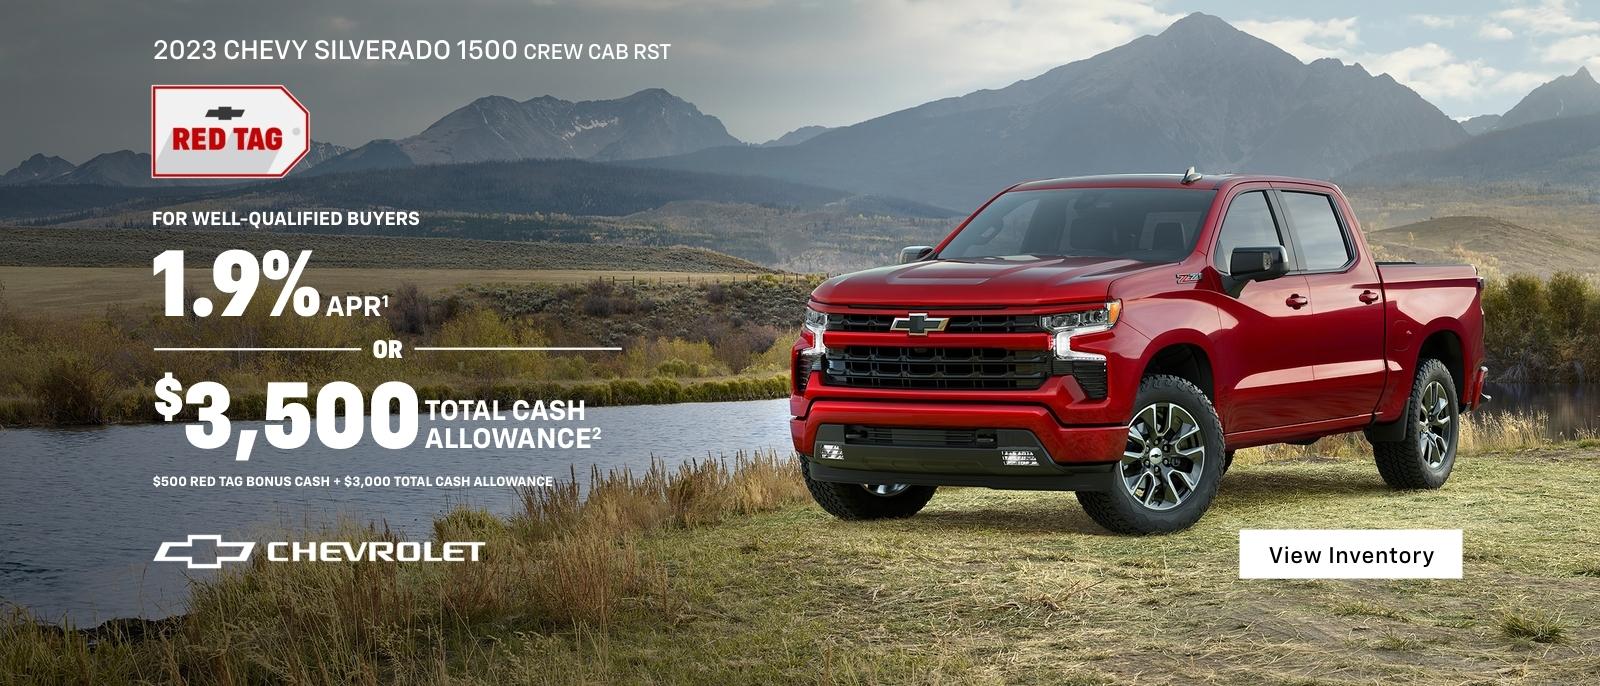 2023 Chevy Silverado 1500 Crew Cab RST. Do more together this holiday season. For well-qualified buyers 1.9% APR or $3,500 total cash allowance. $500 Red Tag bonus cash + $3,000 total cash allowance.